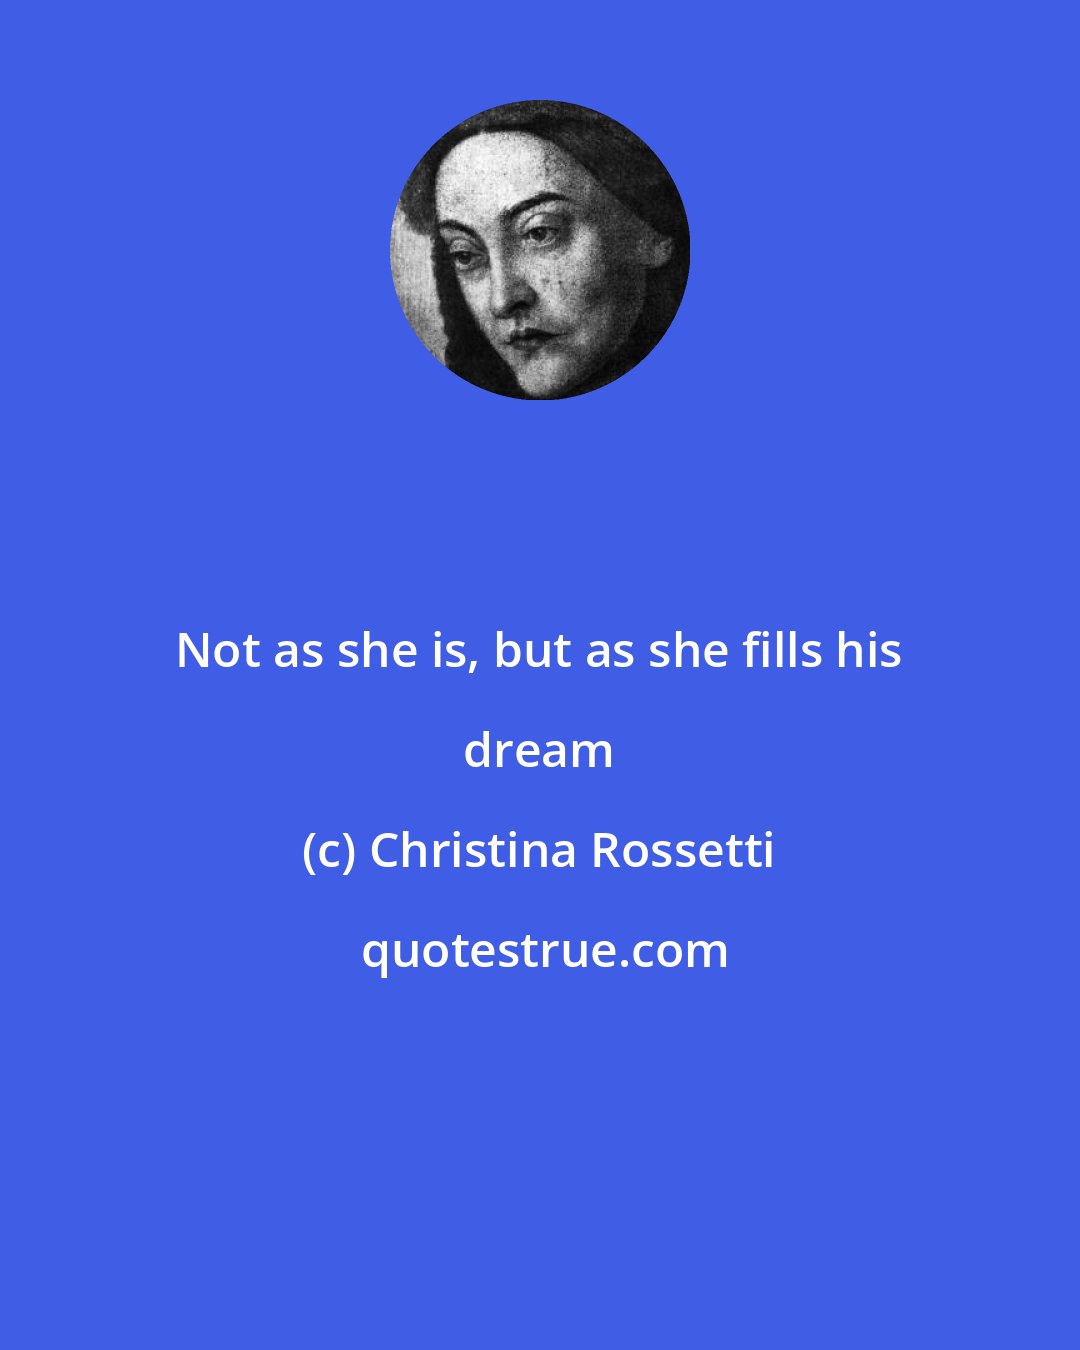 Christina Rossetti: Not as she is, but as she fills his dream